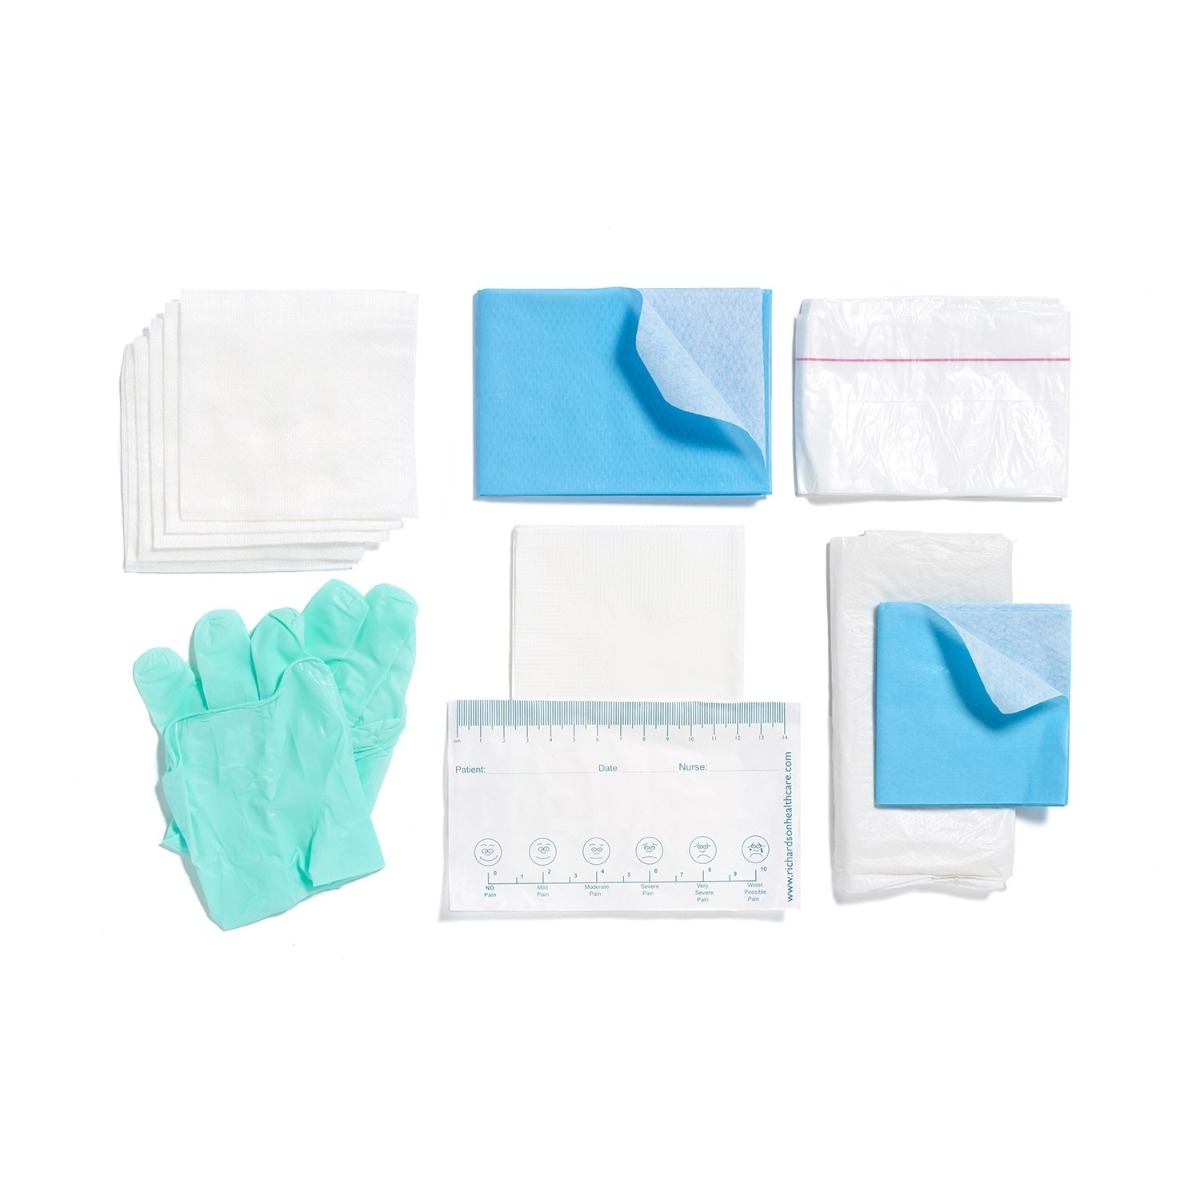 Community Woundcare Pack - Large (Nitrile)